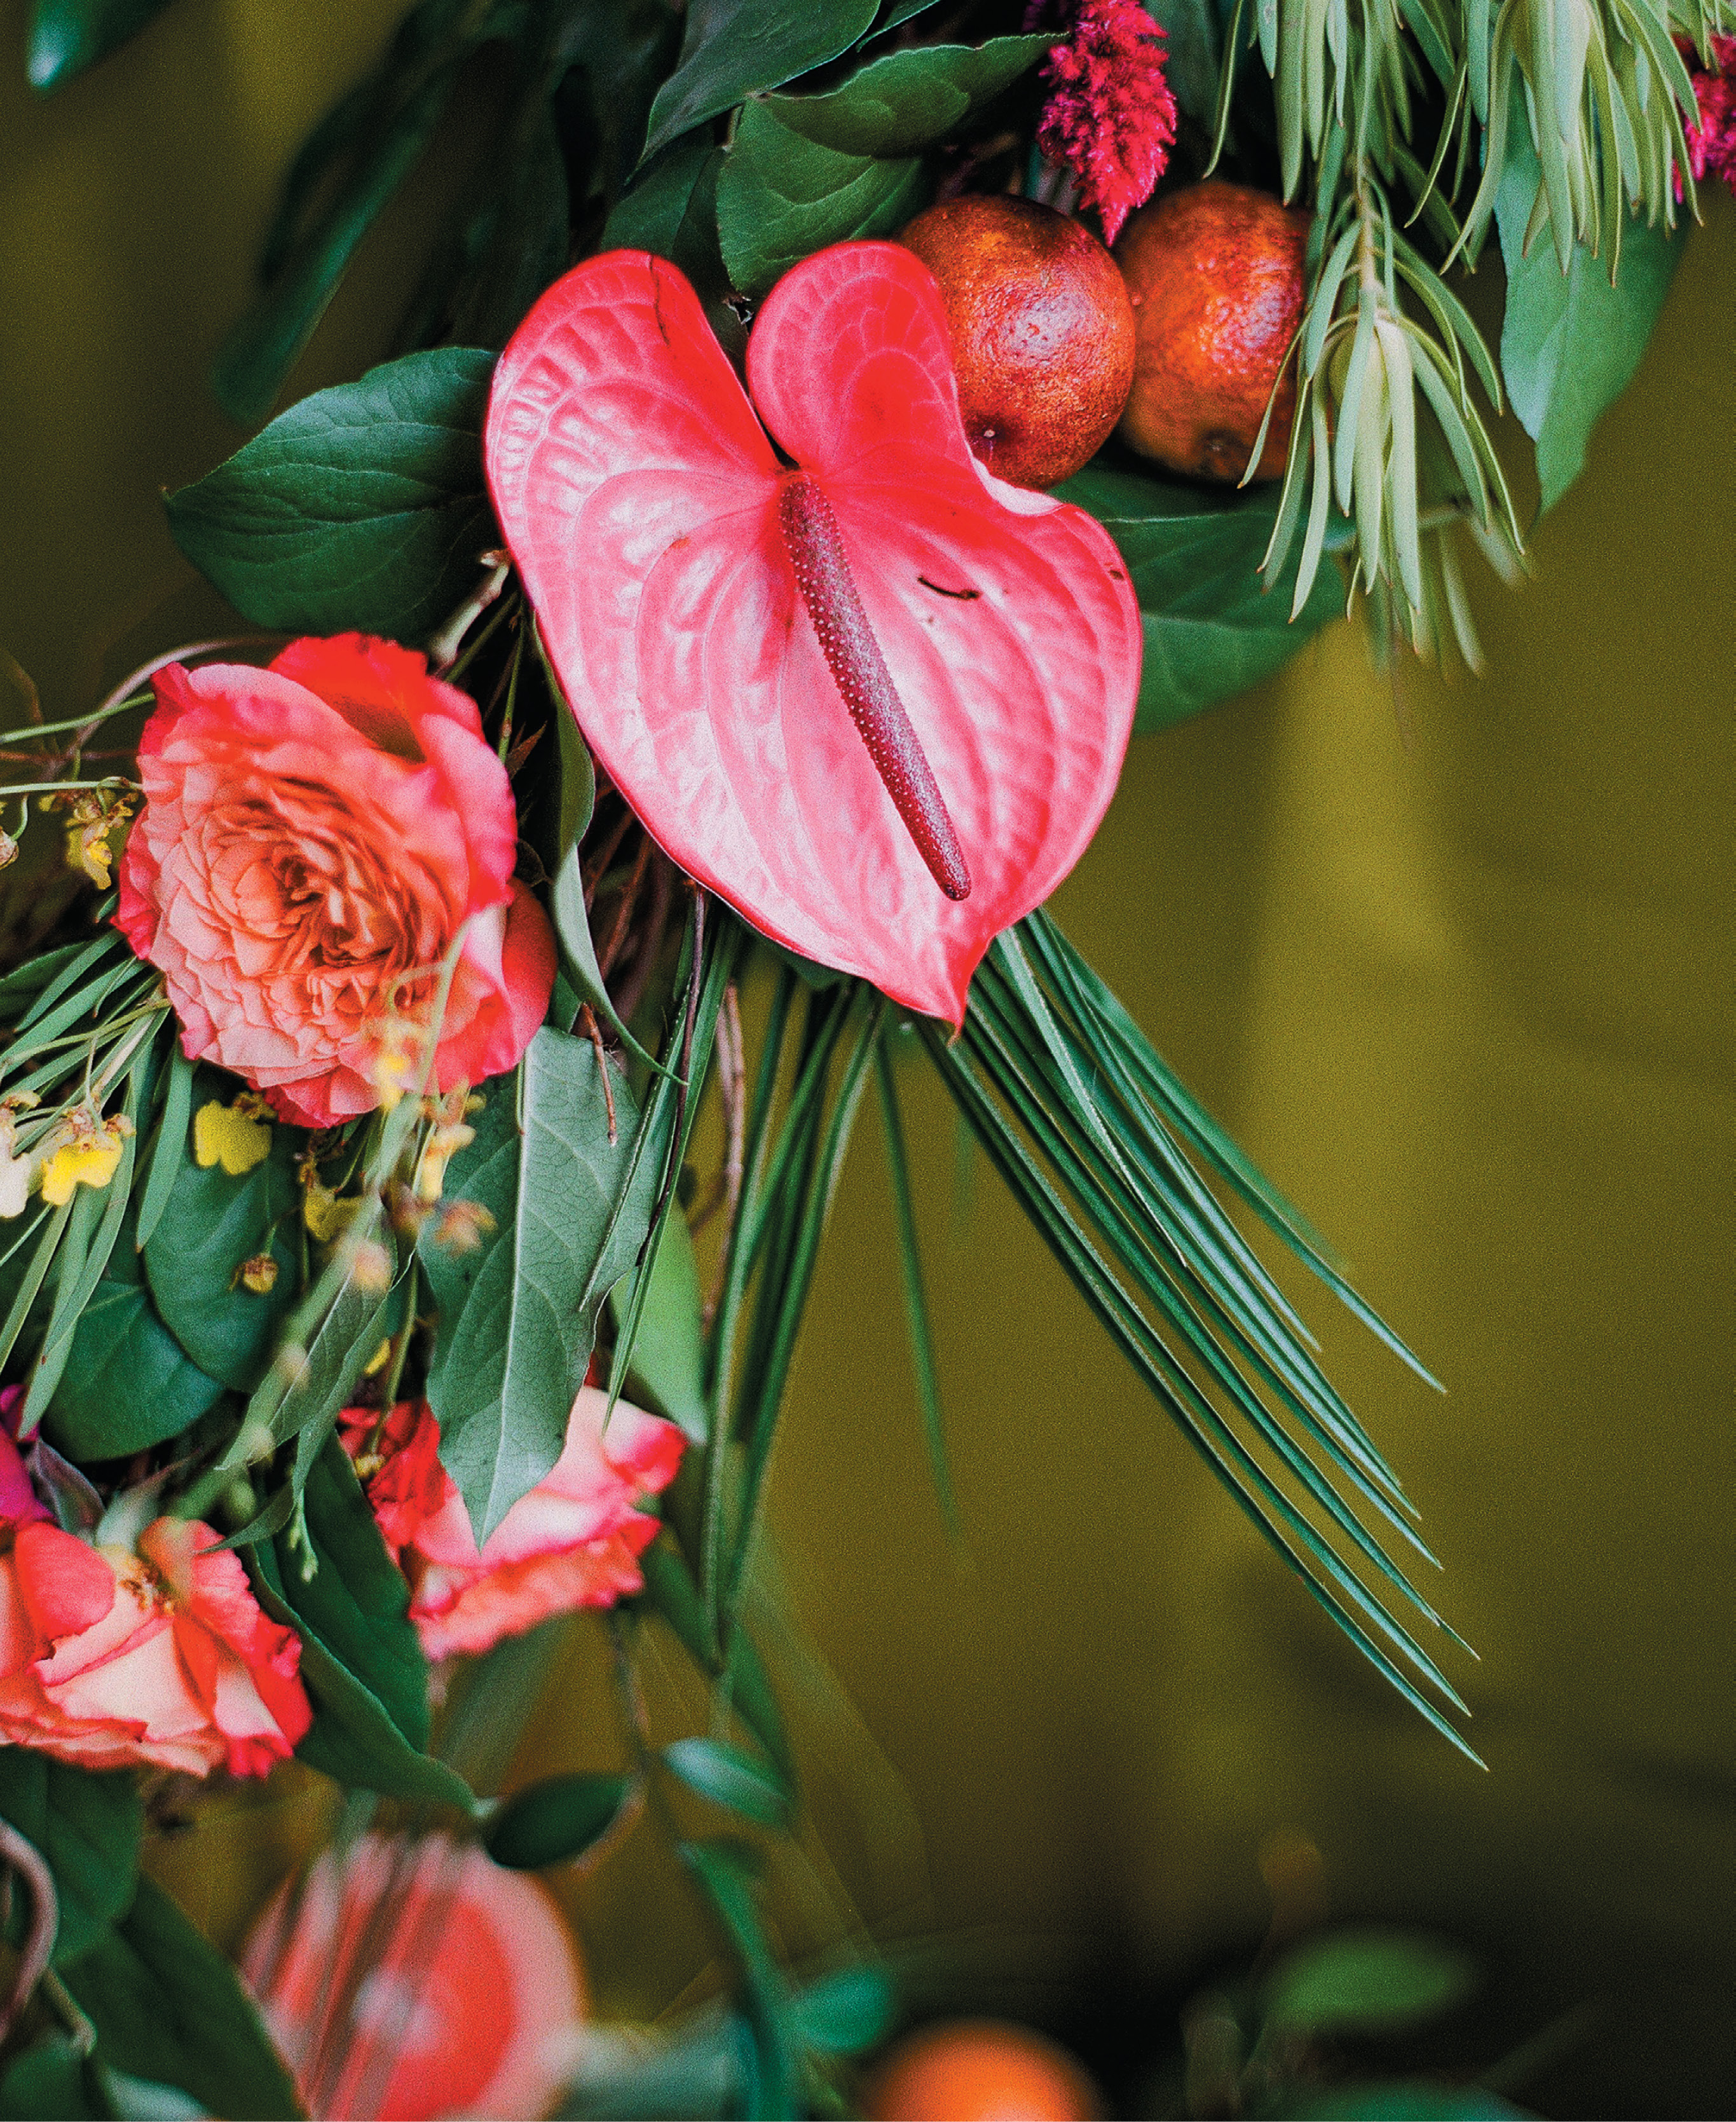 The Vault hostesses Julie Livingston and Reagan Barnes collaborated with floral designer Wimberly Fair on the party’s lush, exotic flora, including anthurium, garden roses, pincushion protea, and orchids amidst Leucadendron, monstera, and palm greenery.